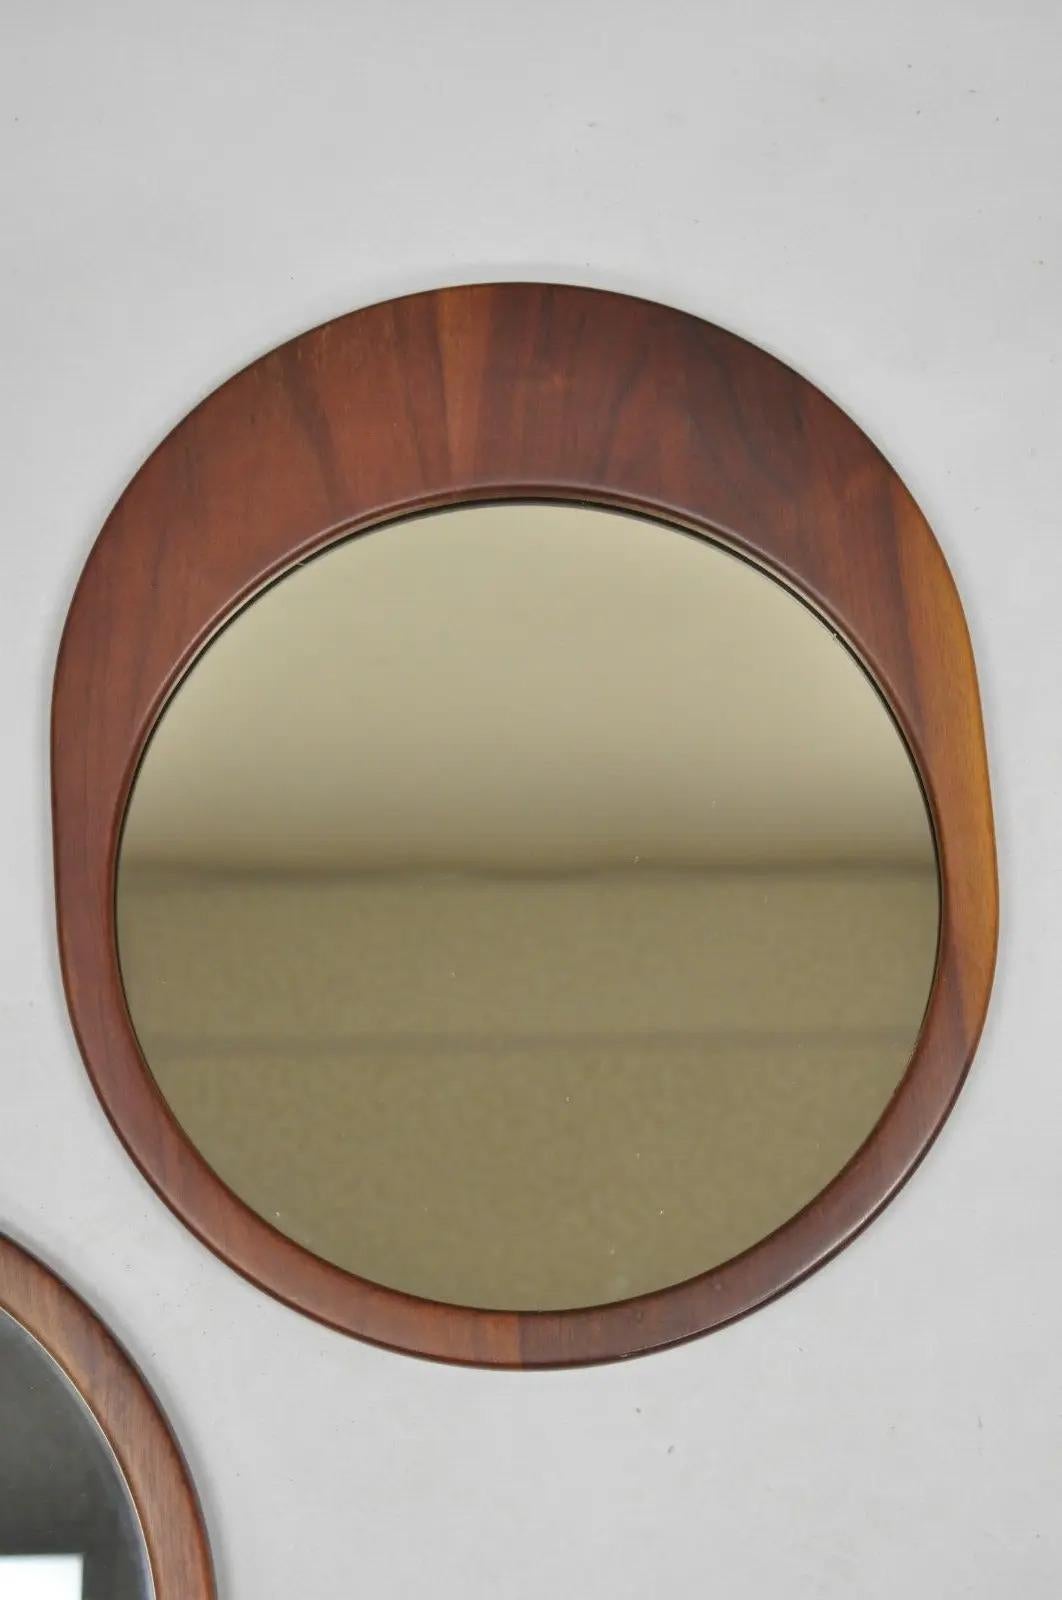 Mid Century Danish Modern Sculpted Teak Wood Mirrors - 3 pc Set In Good Condition For Sale In Philadelphia, PA